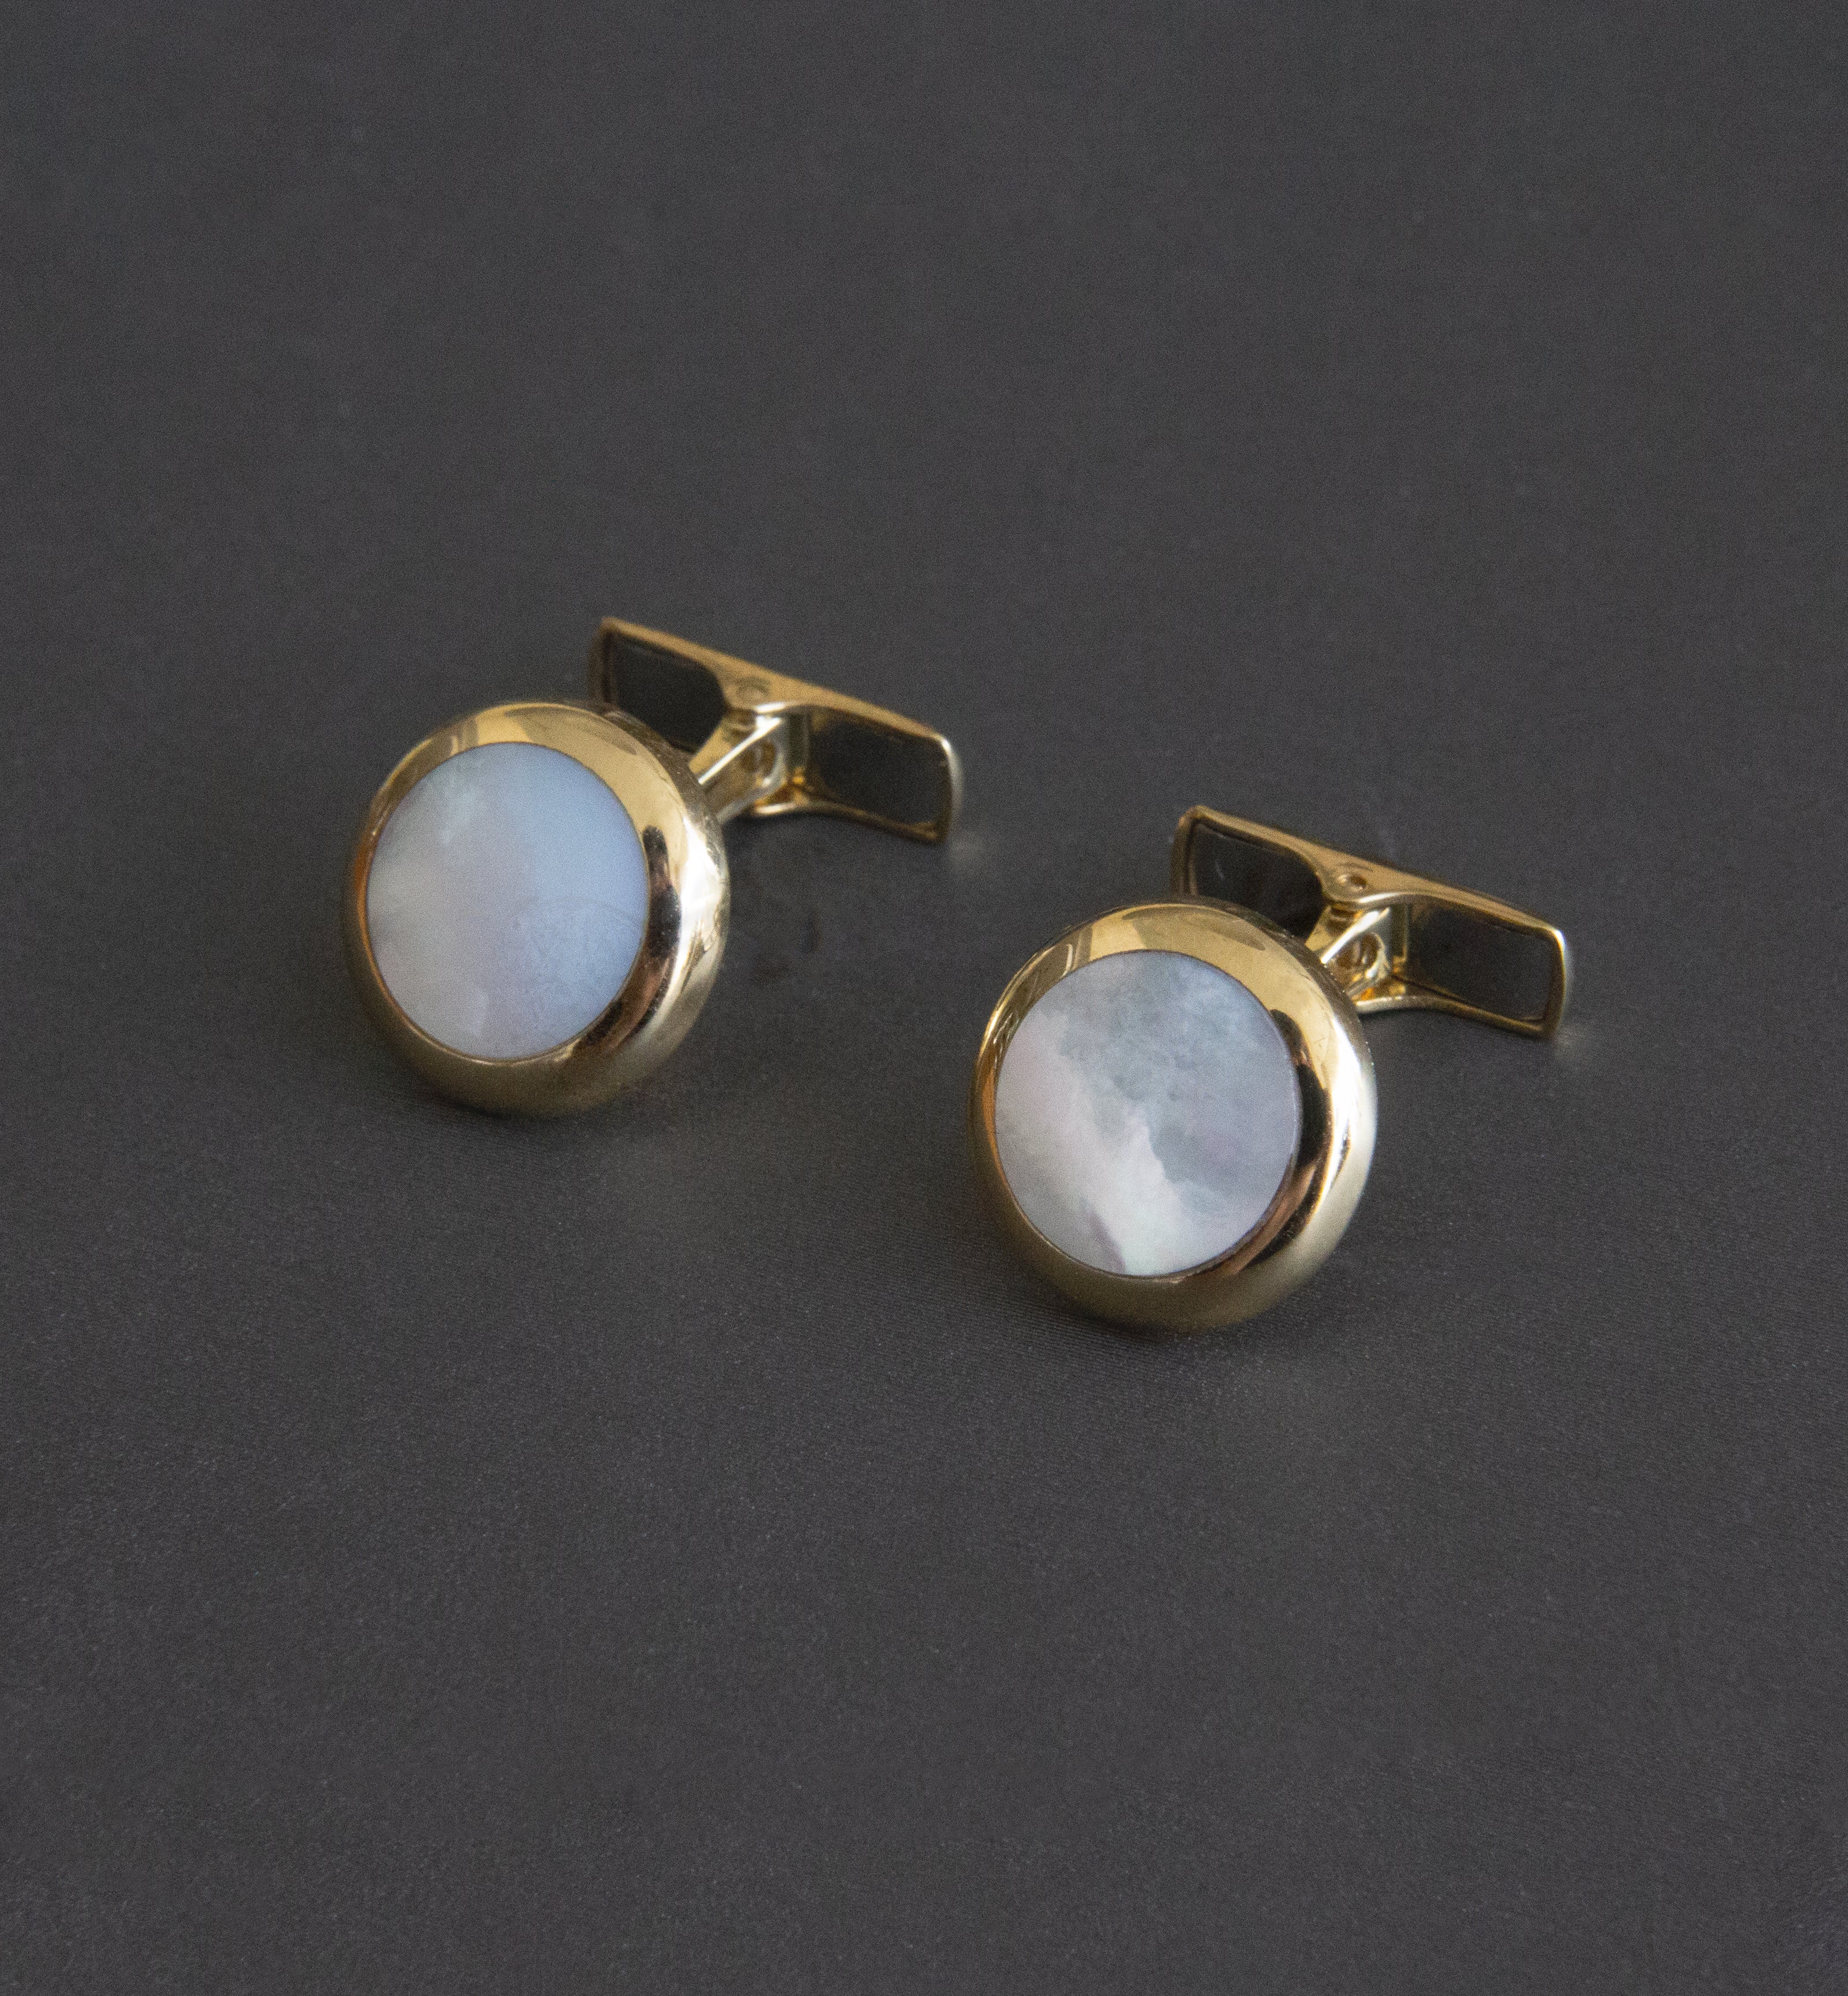 18ct Yellow Gold Cufflinks with Mother of Pearl